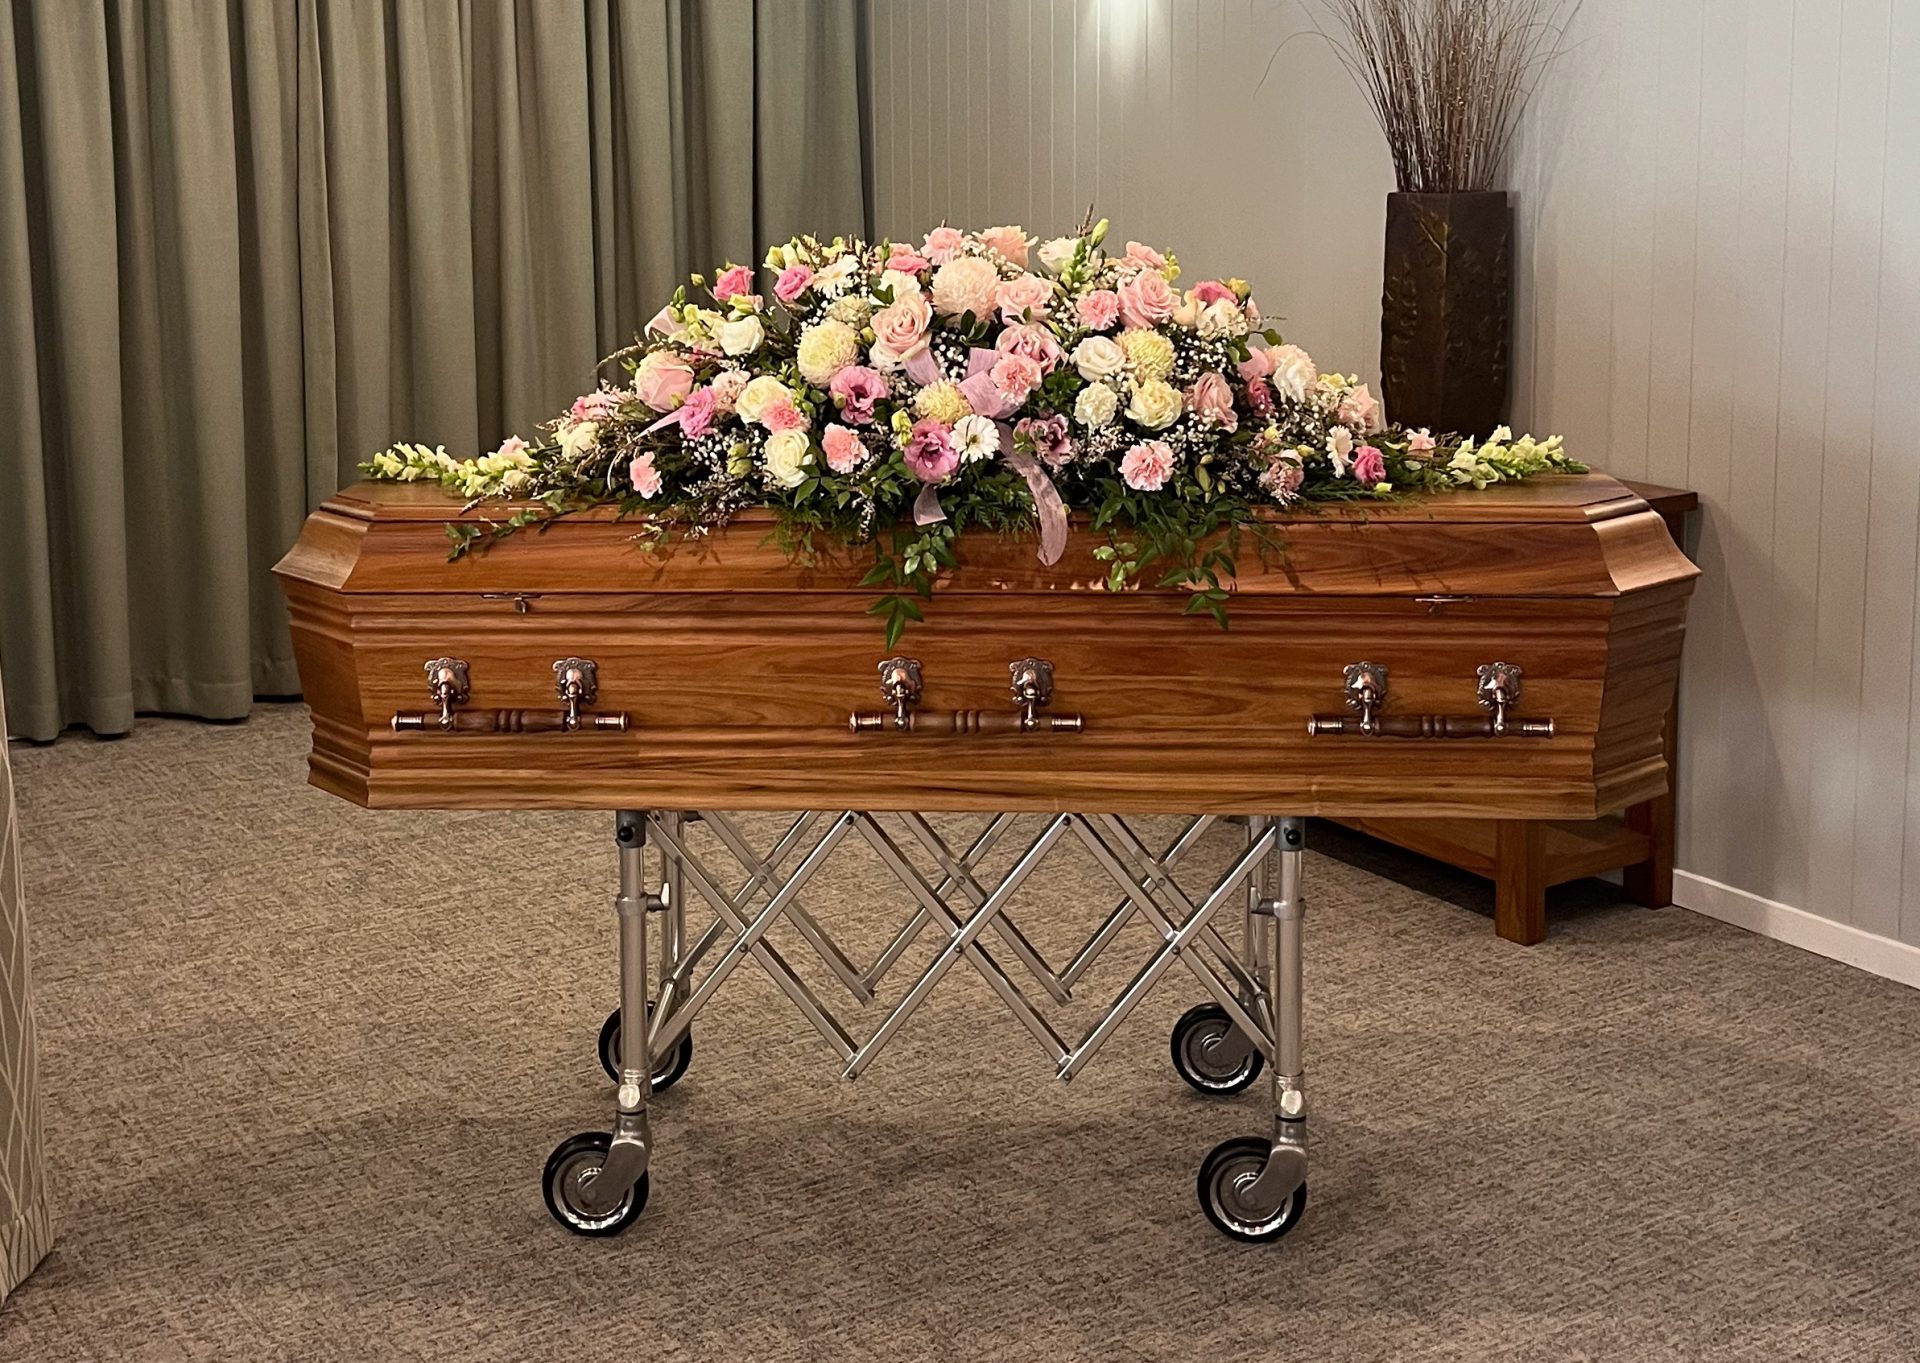 Do you have to buy a coffin if you’re cremated?